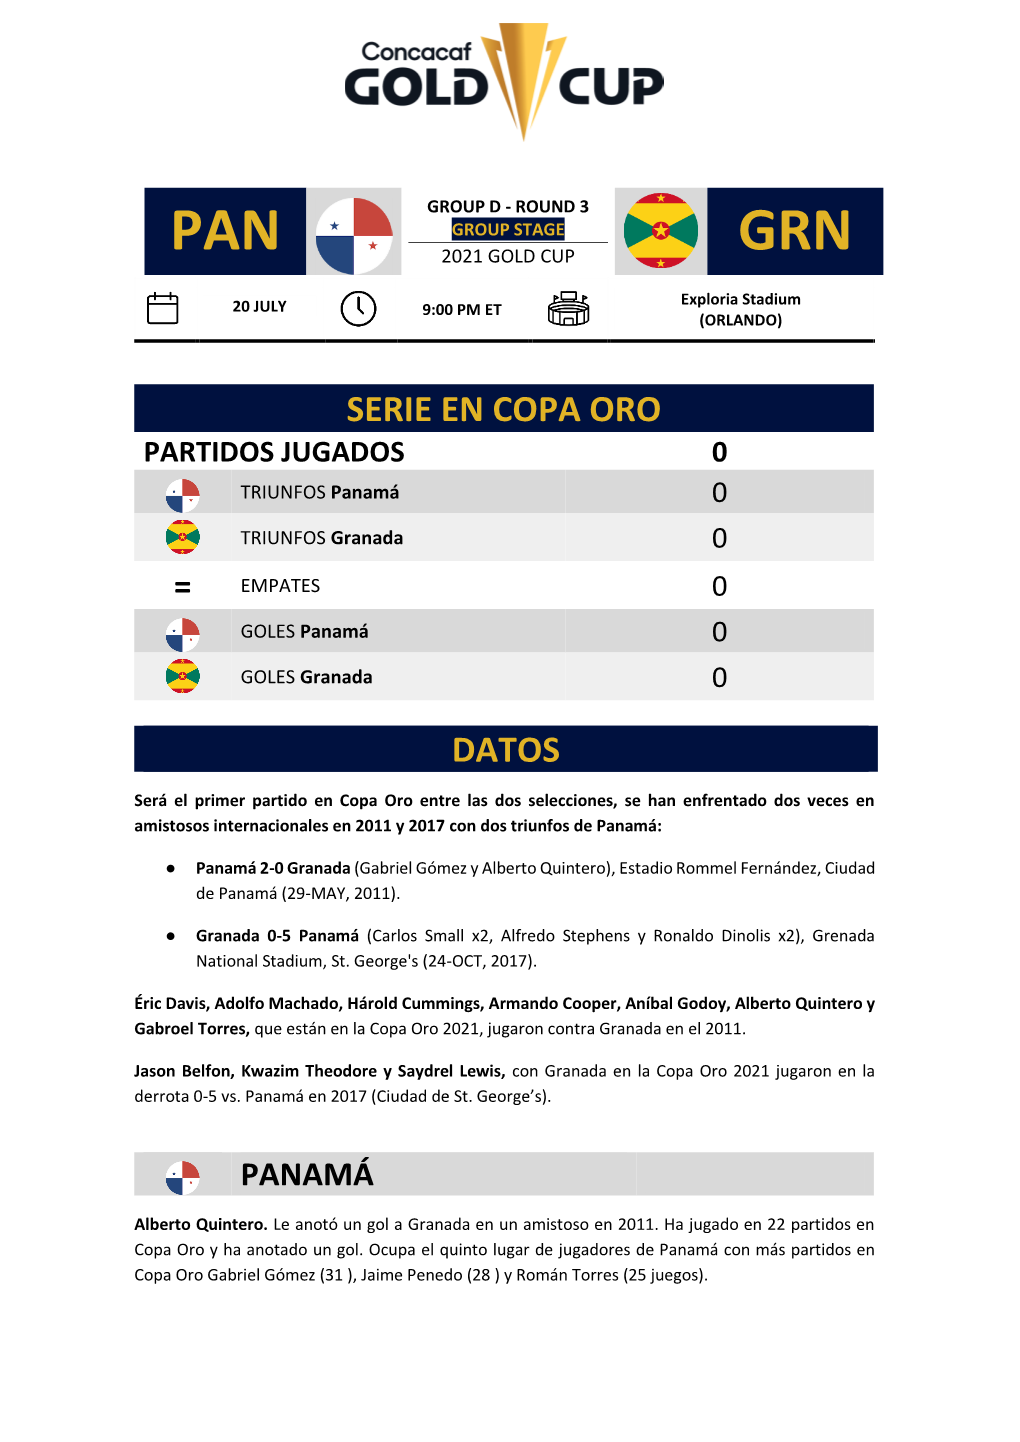 Pan 2021 Gold Cup Grn